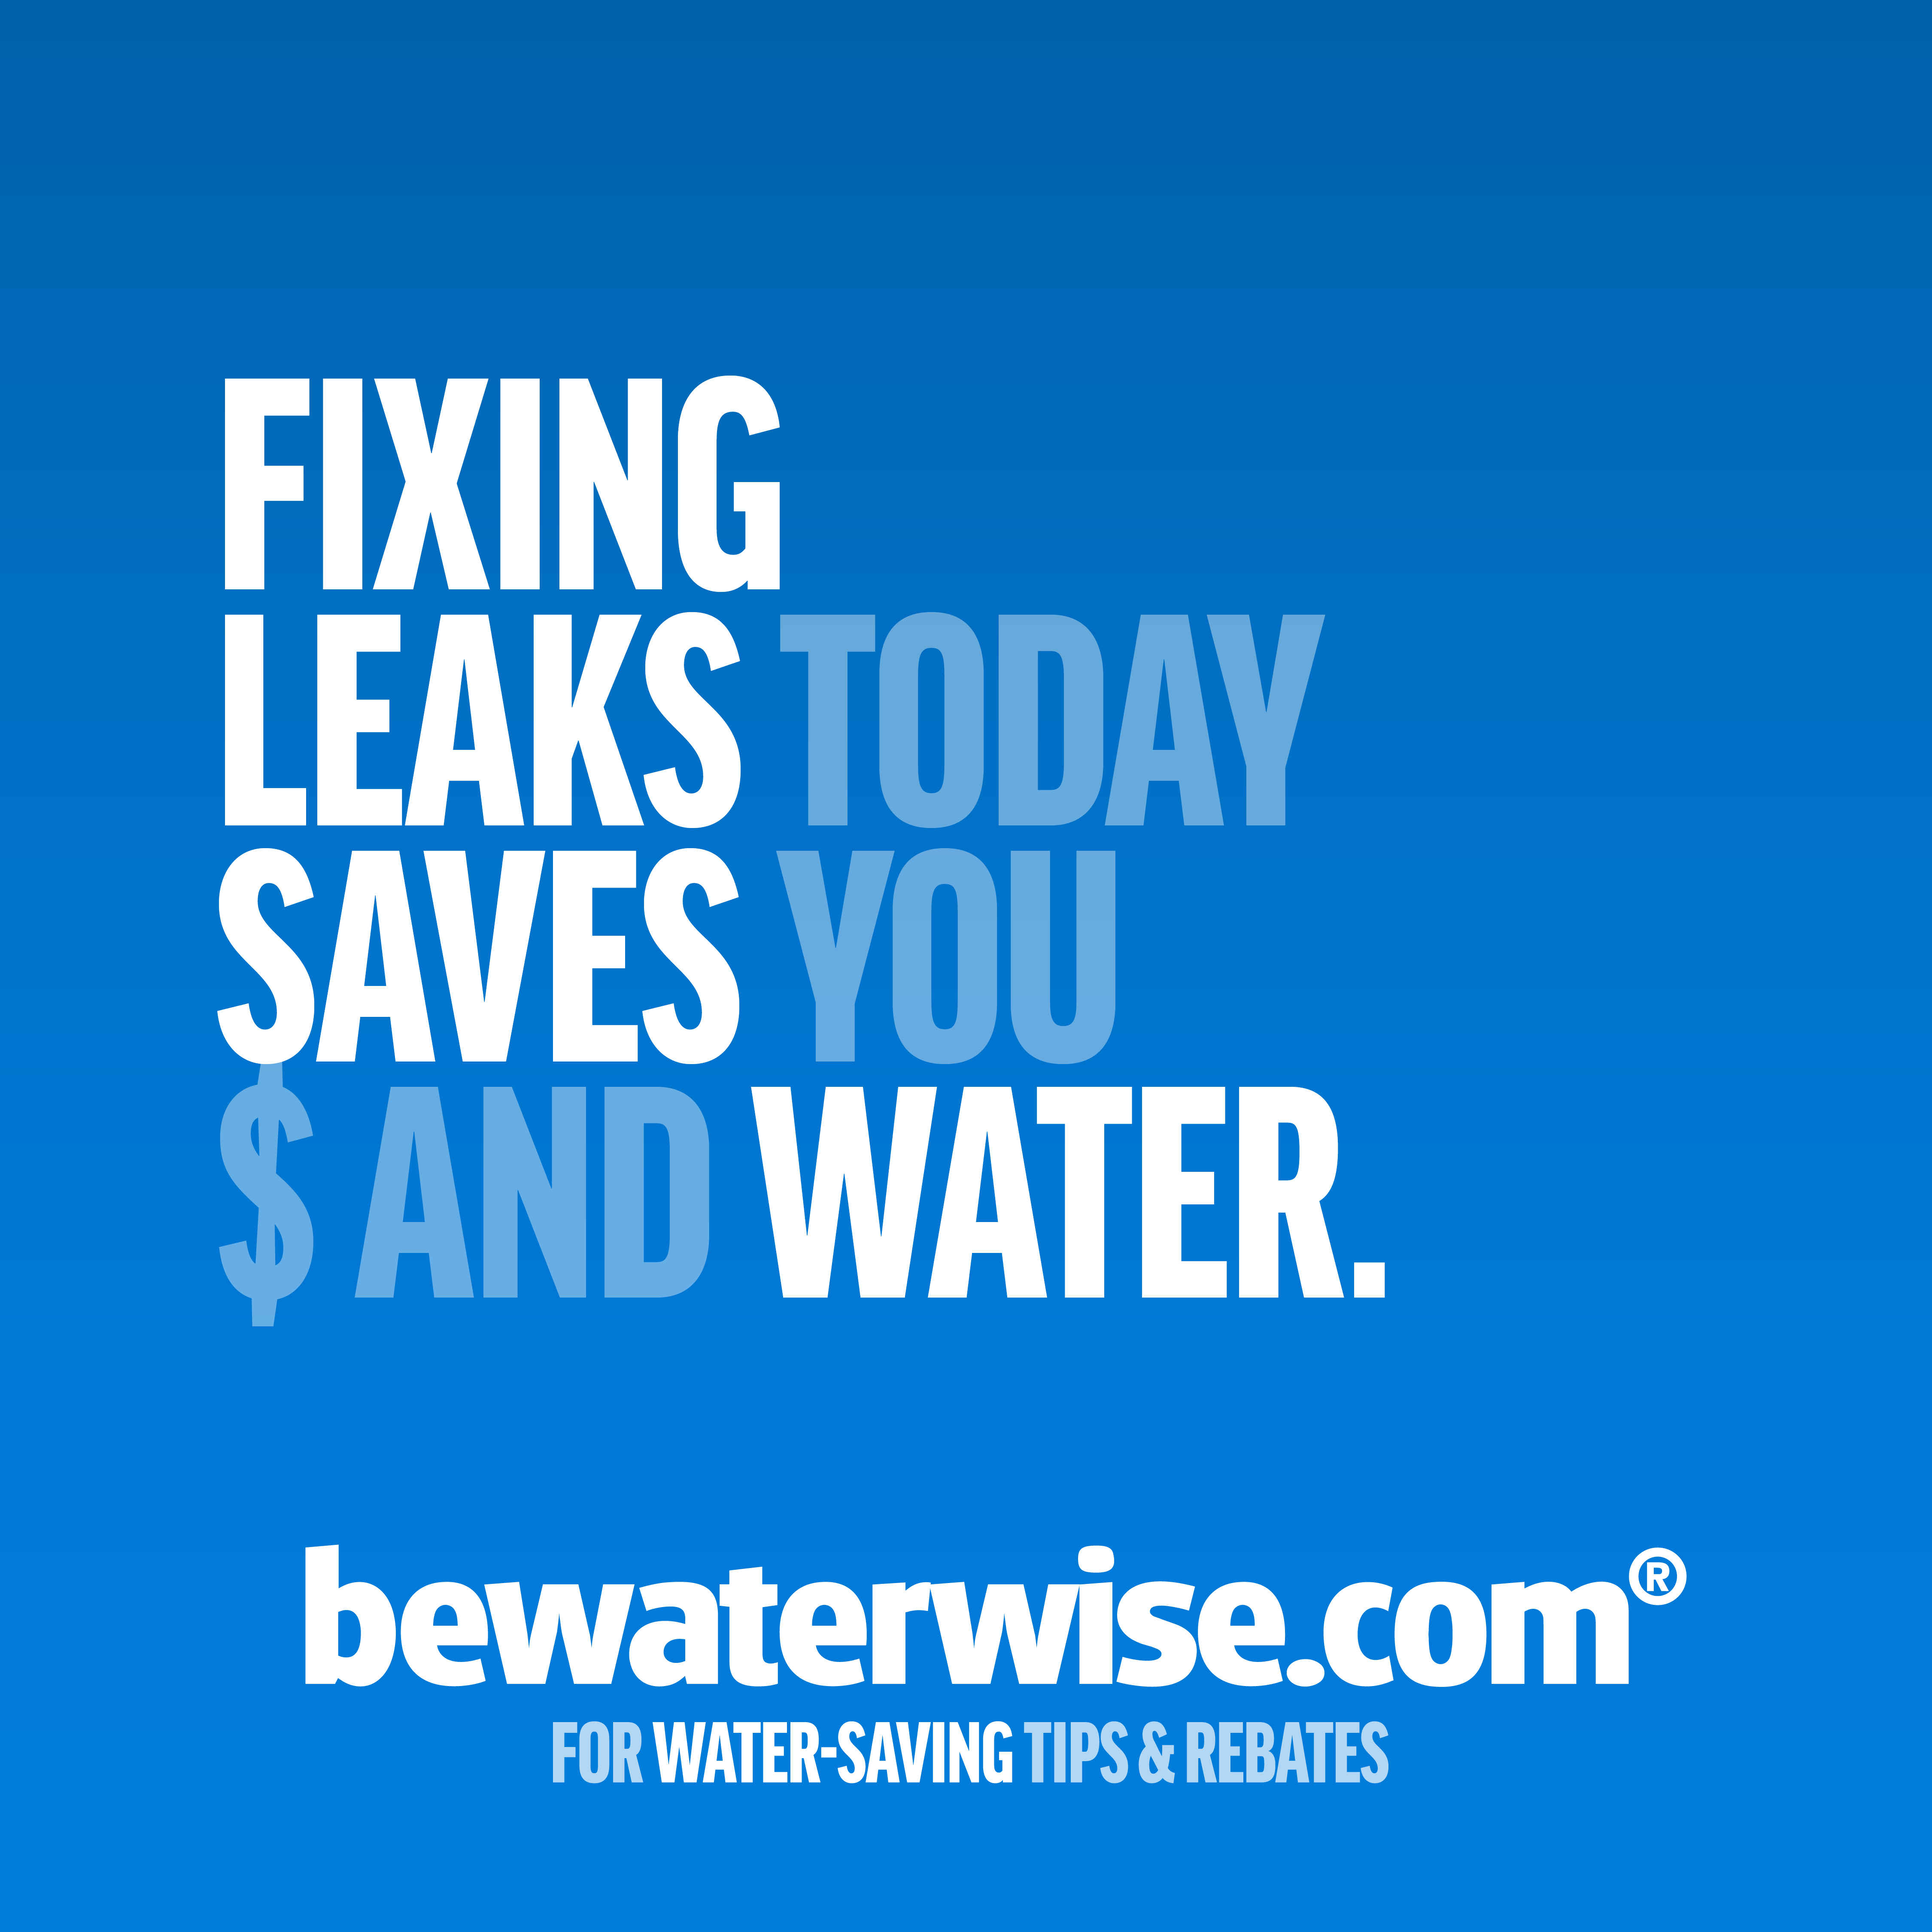 Fixing Leaks Today Saves You $ And Water